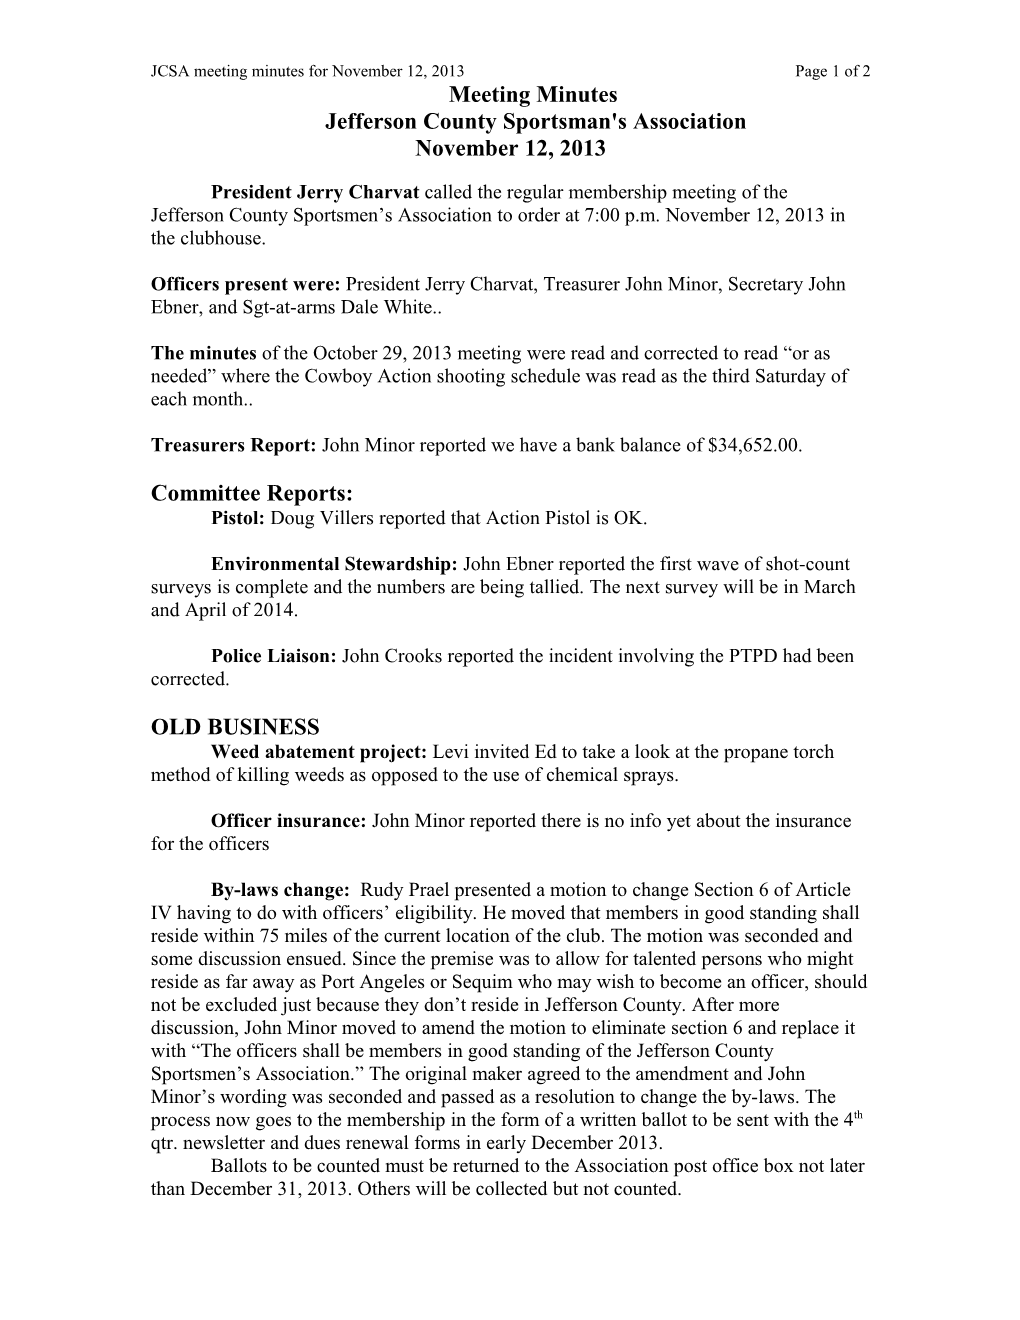 JCSA Meeting Minutes for November 12, 2013Page 1 of 2